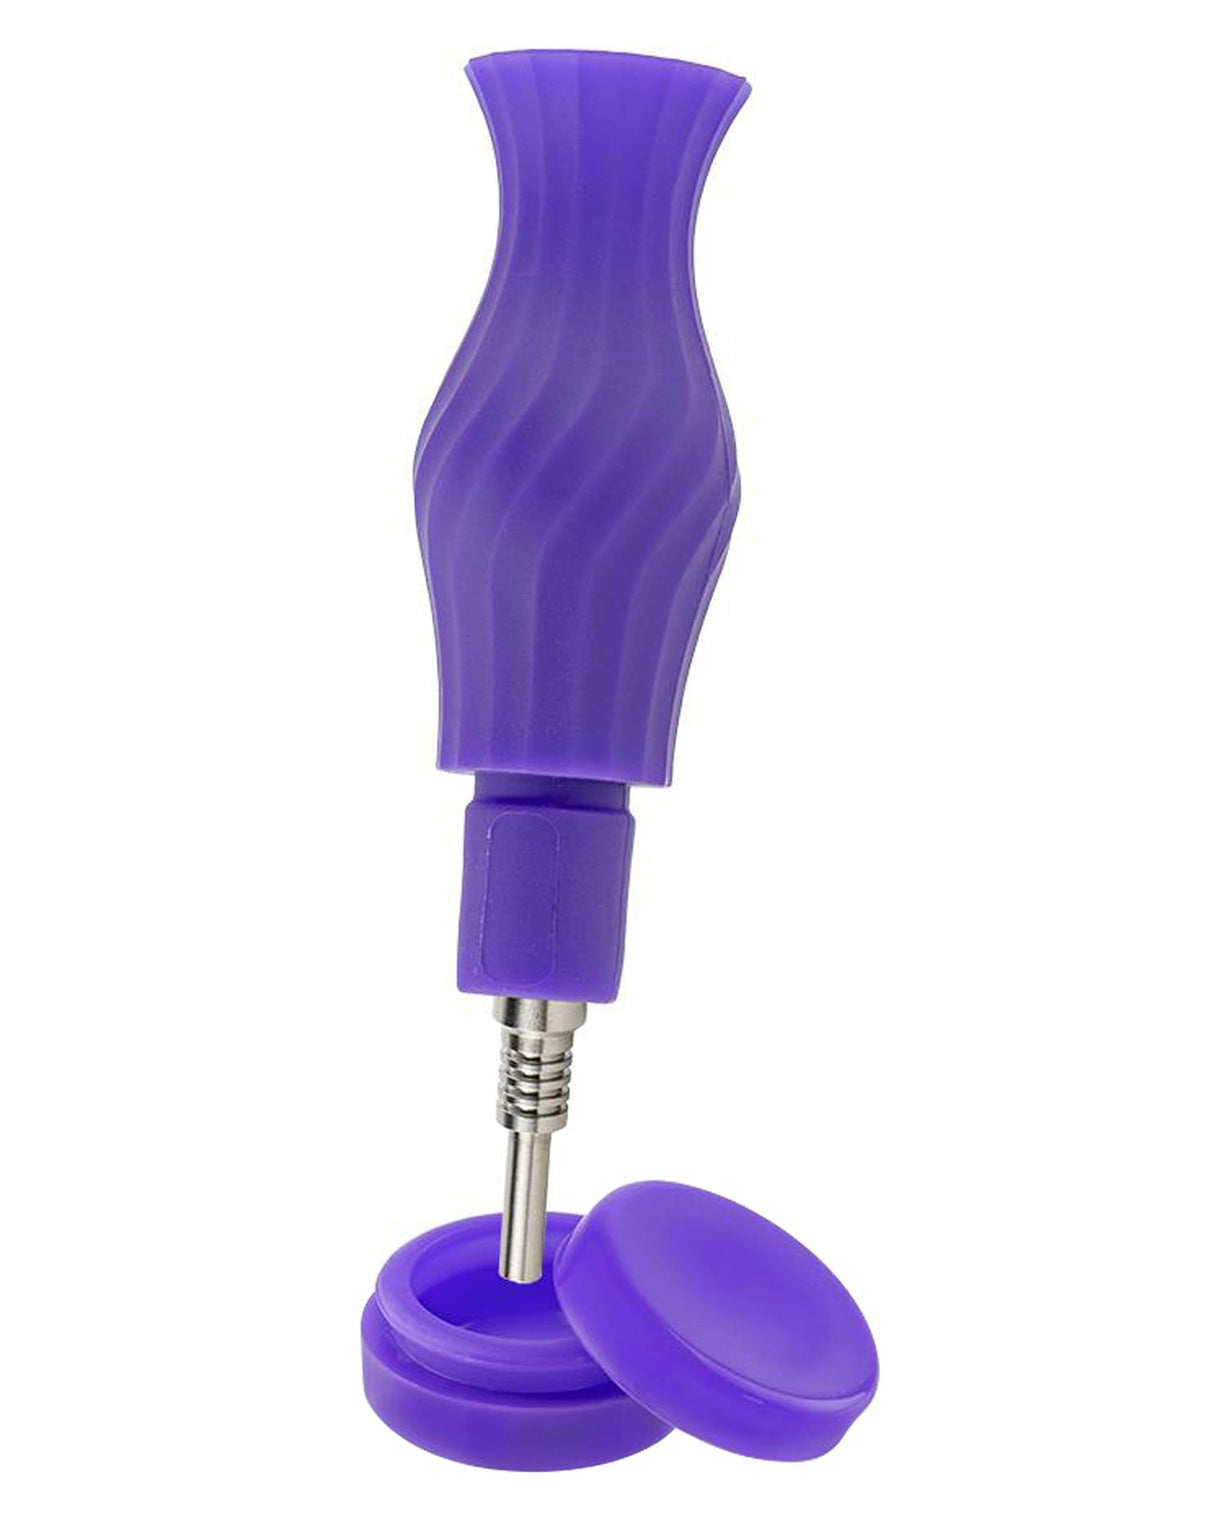 Ooze Ozone Silicone Bong in Purple with Quartz Bowl, Front View on White Background